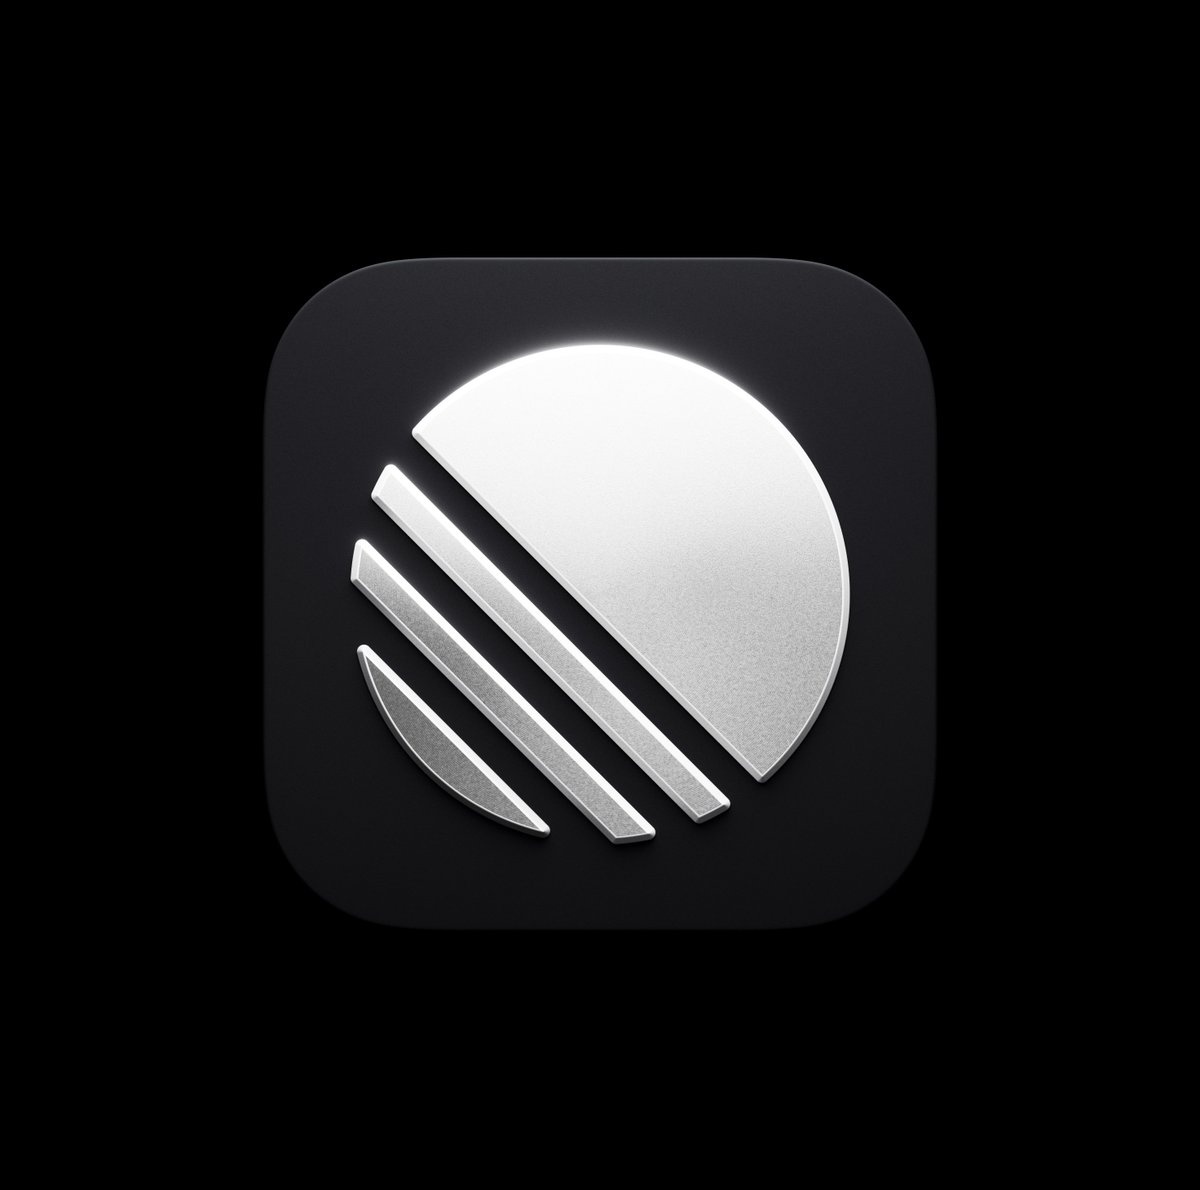 Rendered a new @linear icon to complement the interface refresh. Shipping in the latest app update.